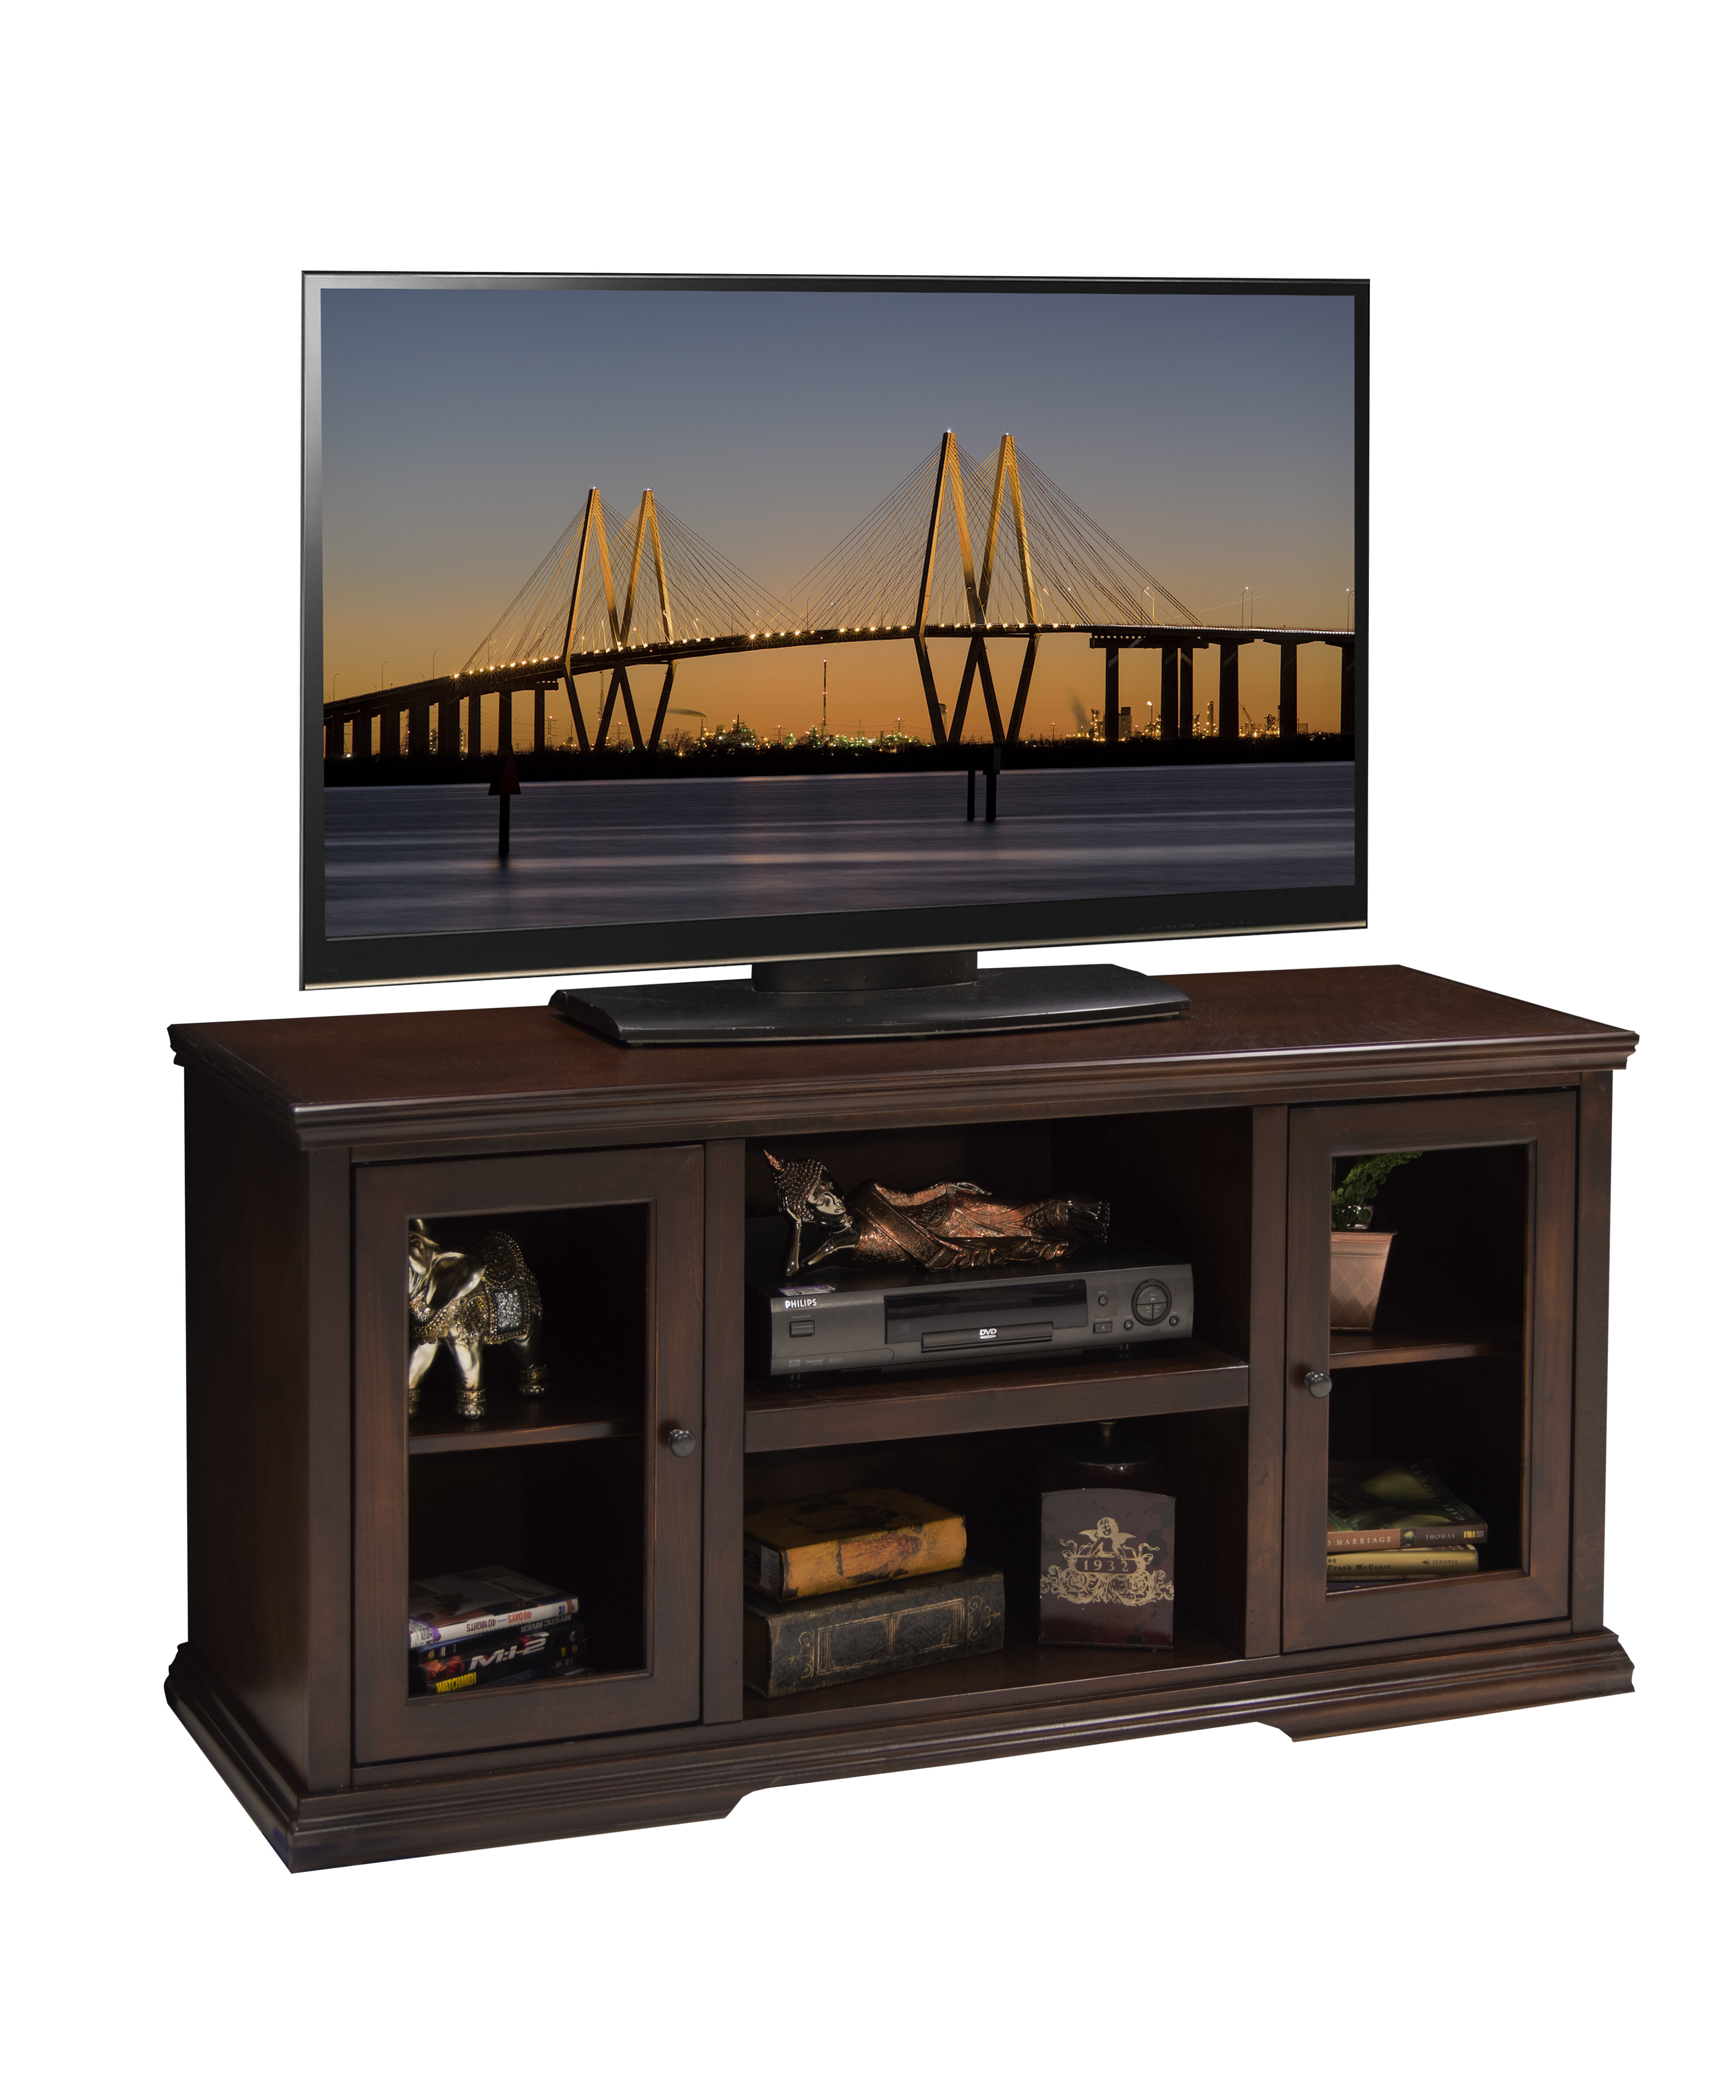 Tv Cabinet with Electric Fireplace Inspirational Keating Tv Stand for Tvs Up to 50"